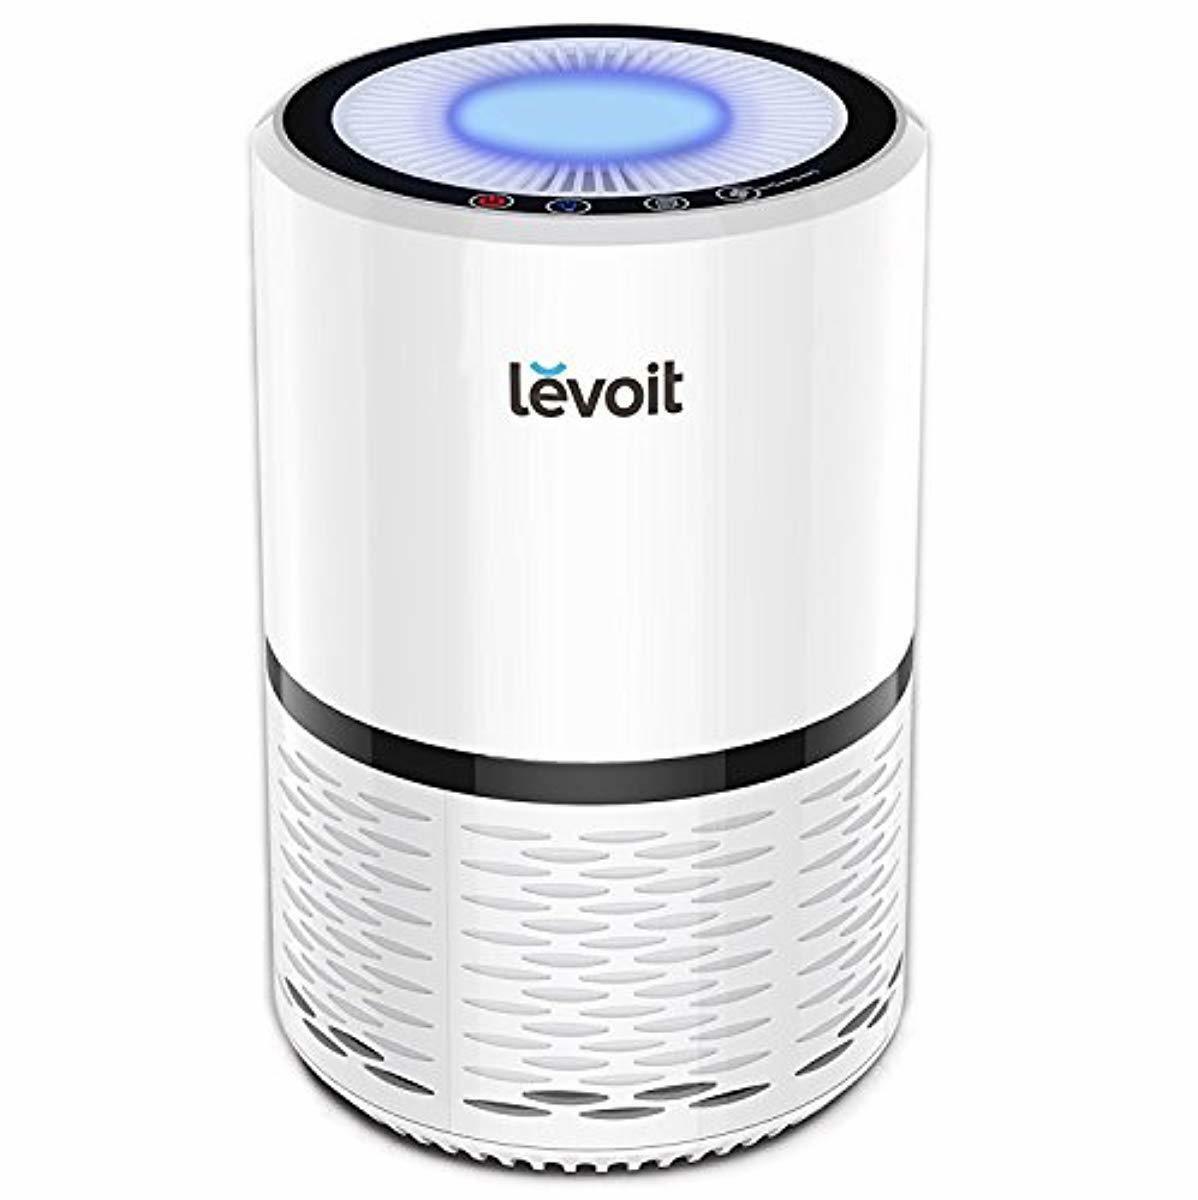 LEVOIT Air Purifier for Home Smokers Allergies and Pets Hair, True HEPA ...